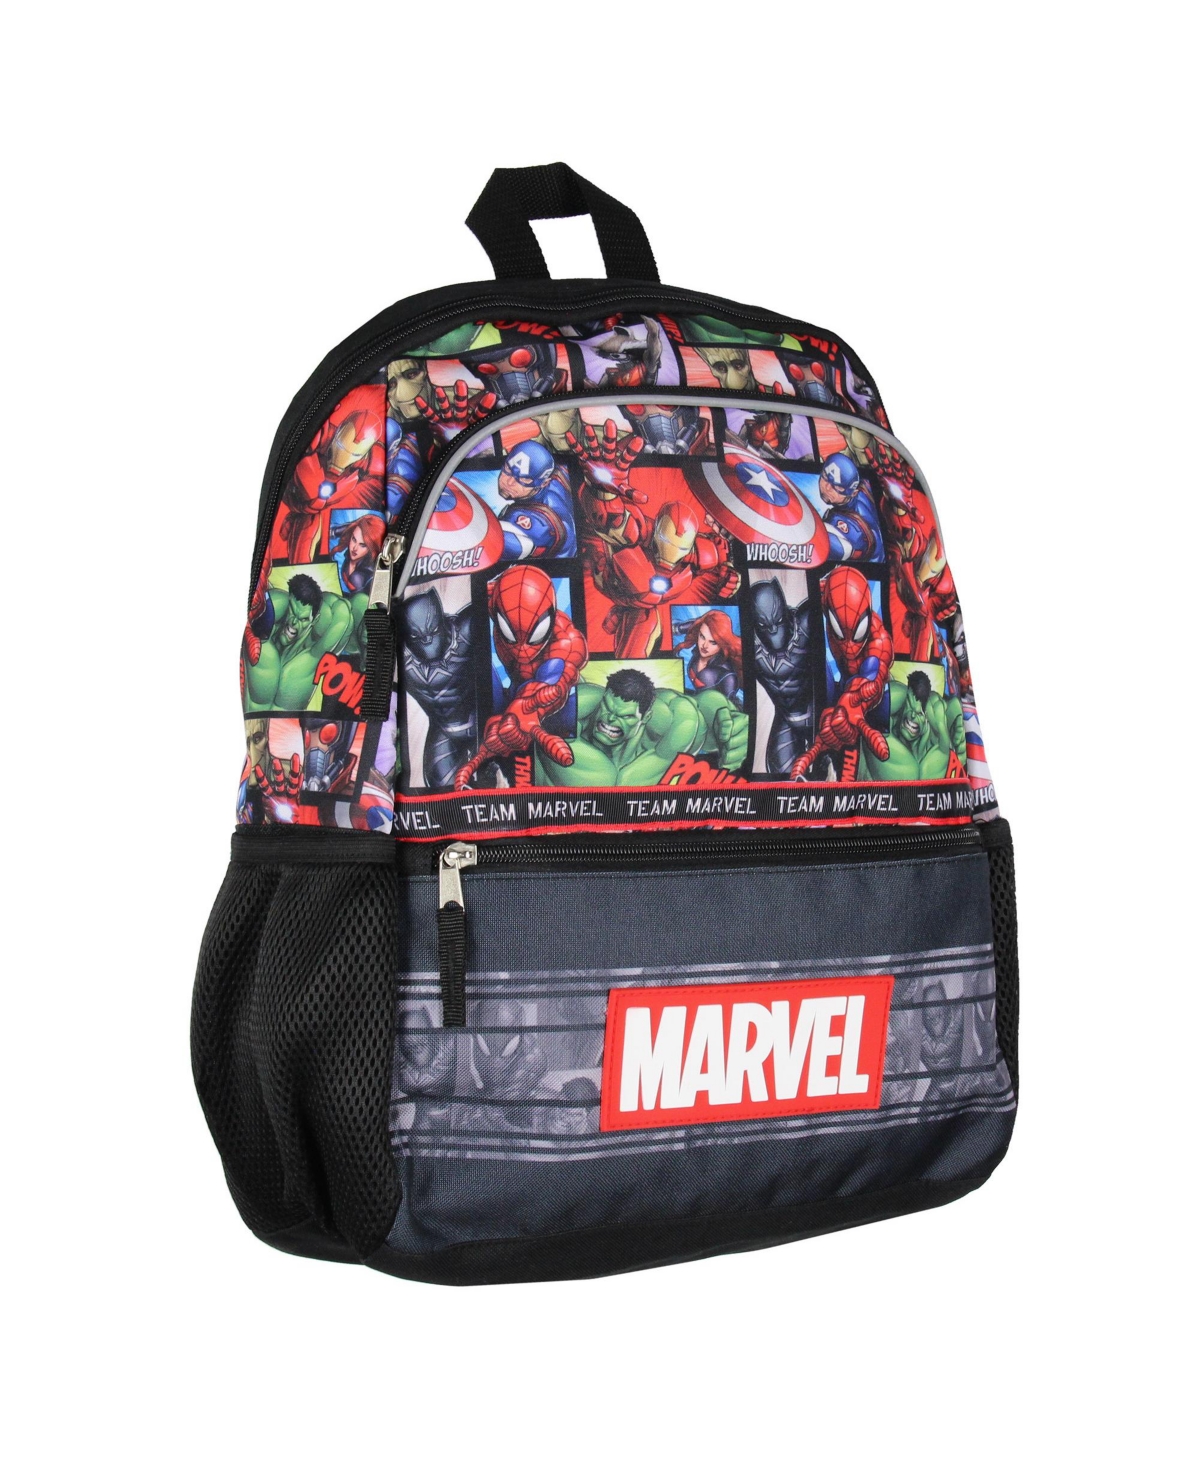 Avengers Spider-Man Iron Man Captain America Hulk 16" Book Bag School Travel Backpack With Water Bottle Pockets and Adjustable Back Straps - Open Misc